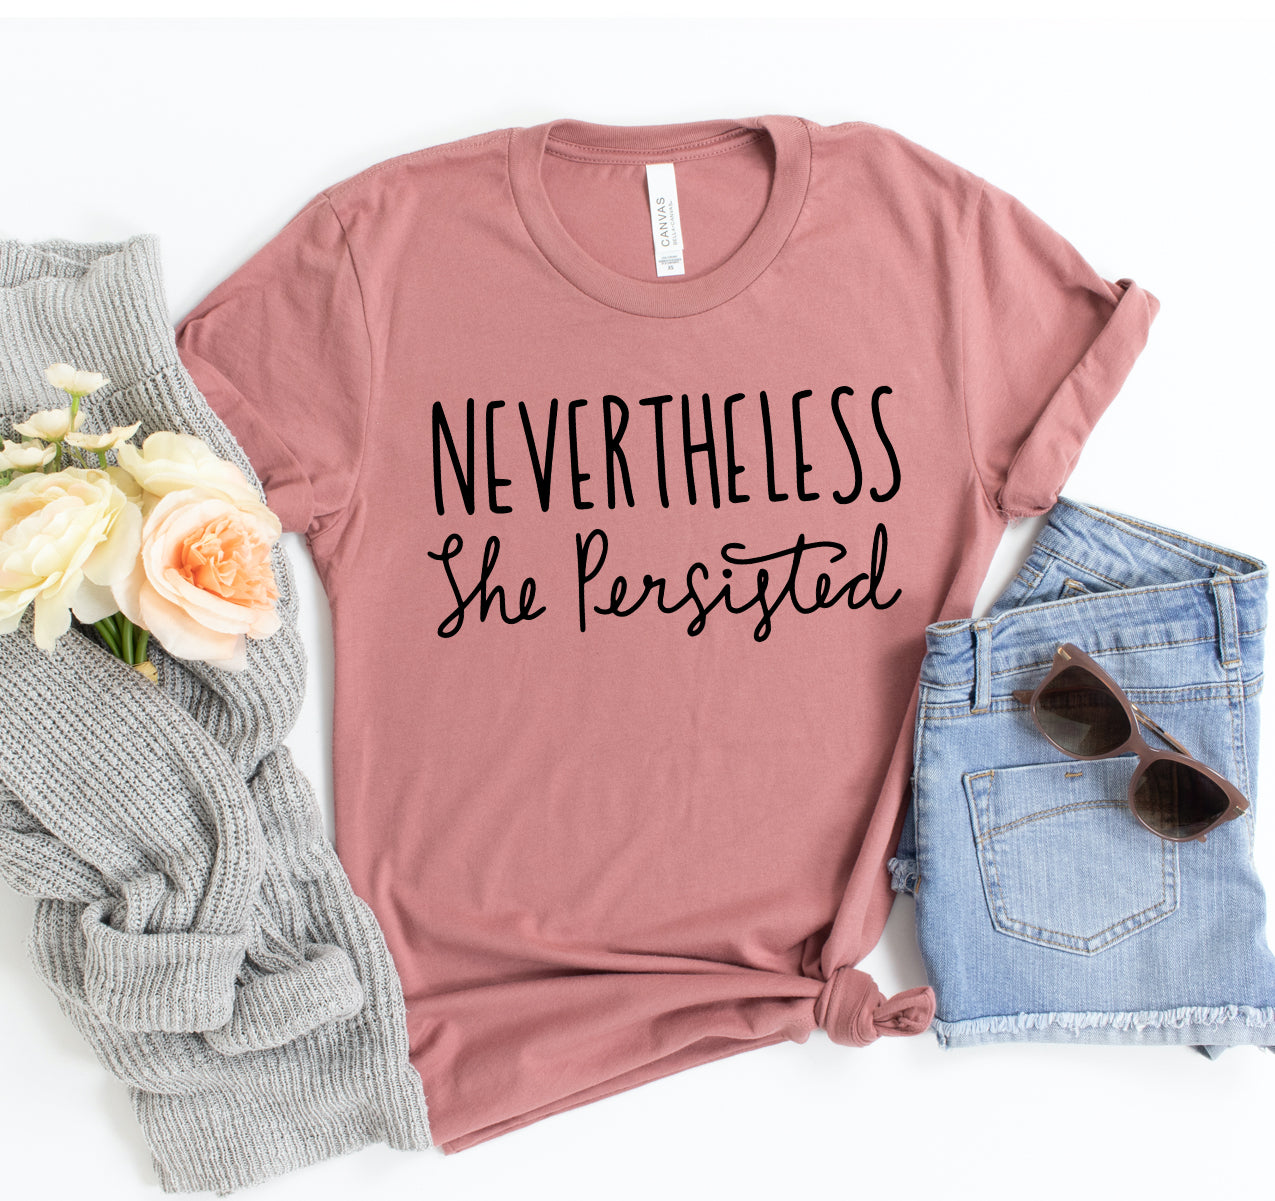 Never The Less She Persisted T-shirt